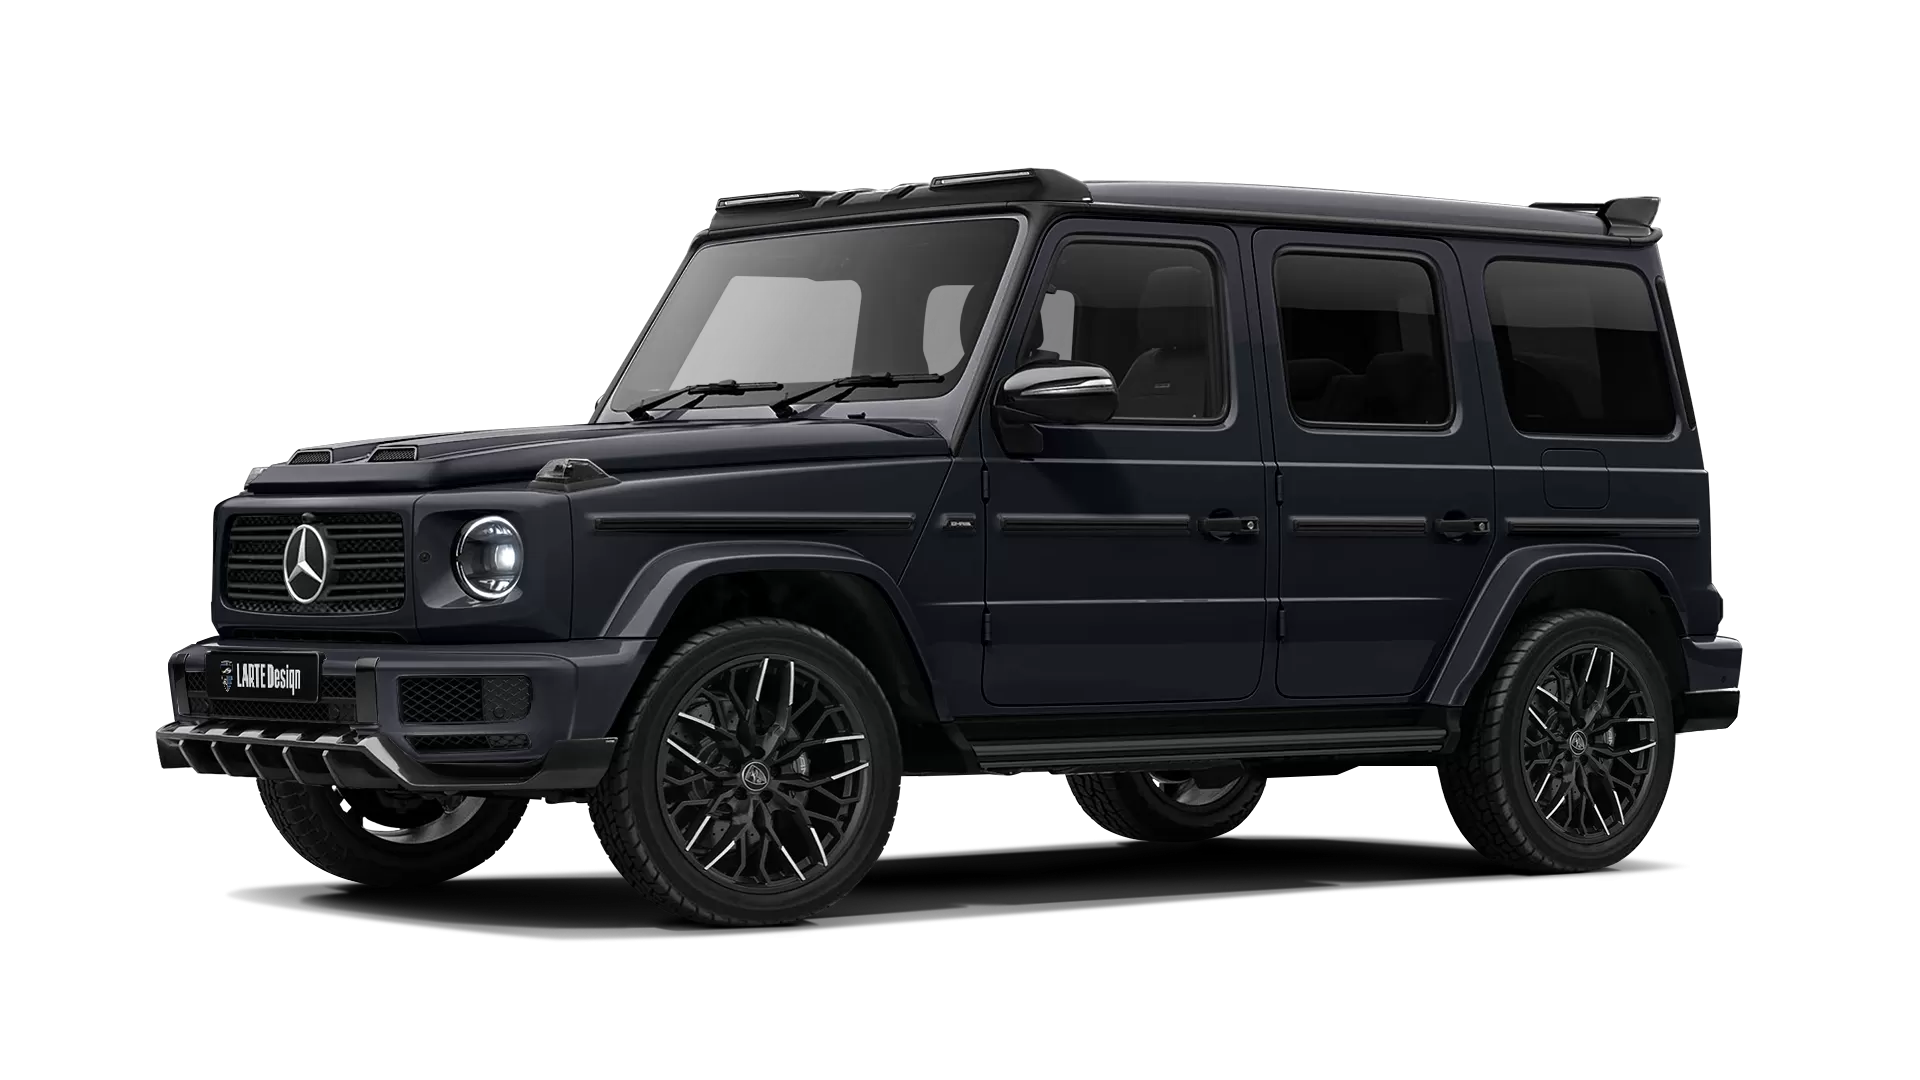 Mercedes G class W463 with painted body kit: front view shown in Obsidian Black